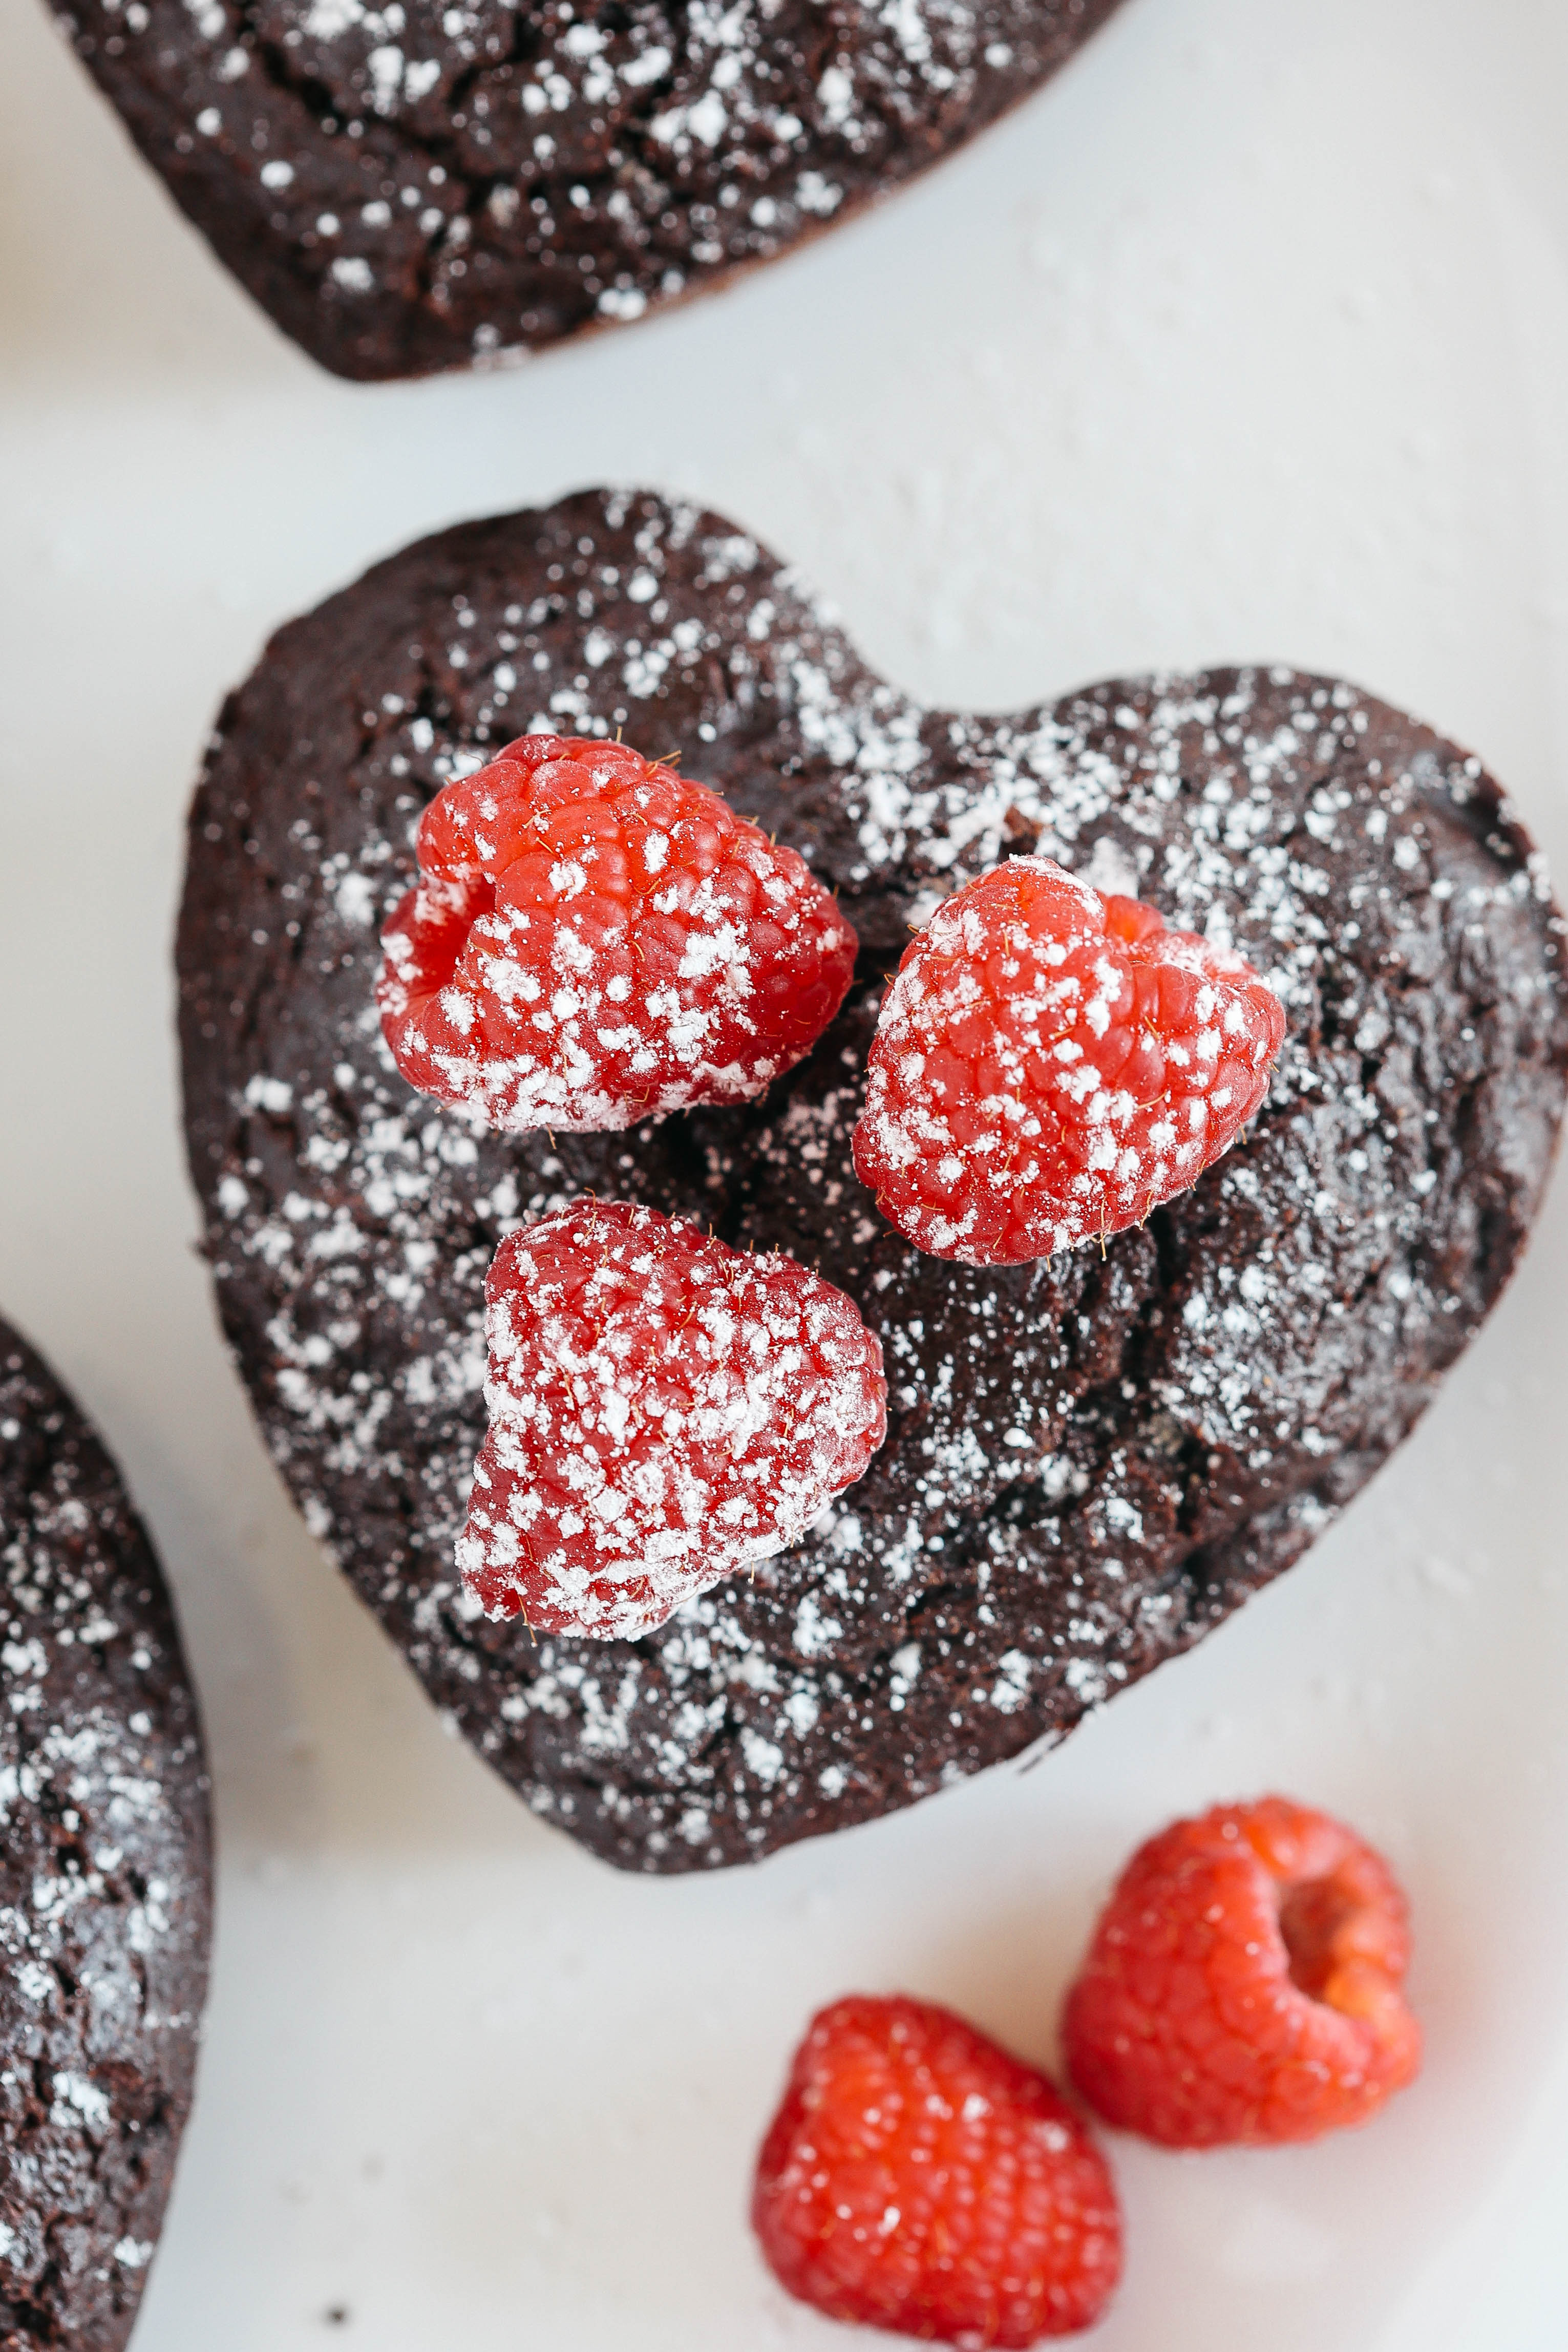 Perfectly portioned Mini Chocolate Cakes with delicious raspberry filling in every bite!  Gluten-free, dairy-free, refined sugar-free and SUPER moist!